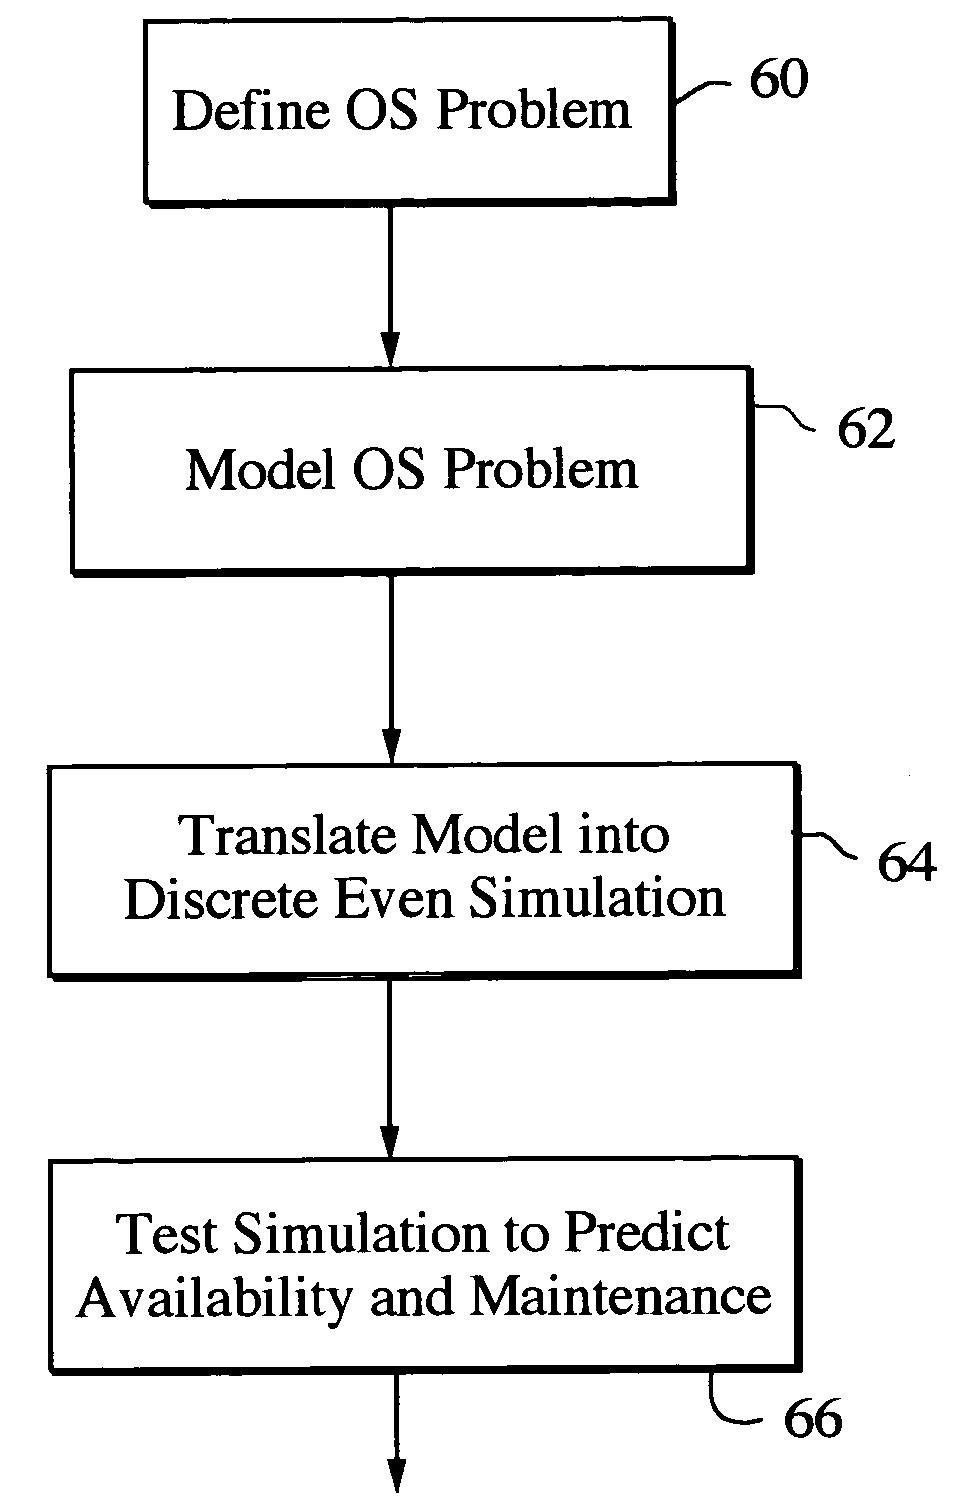 Operations and support discrete event stimulation system and method